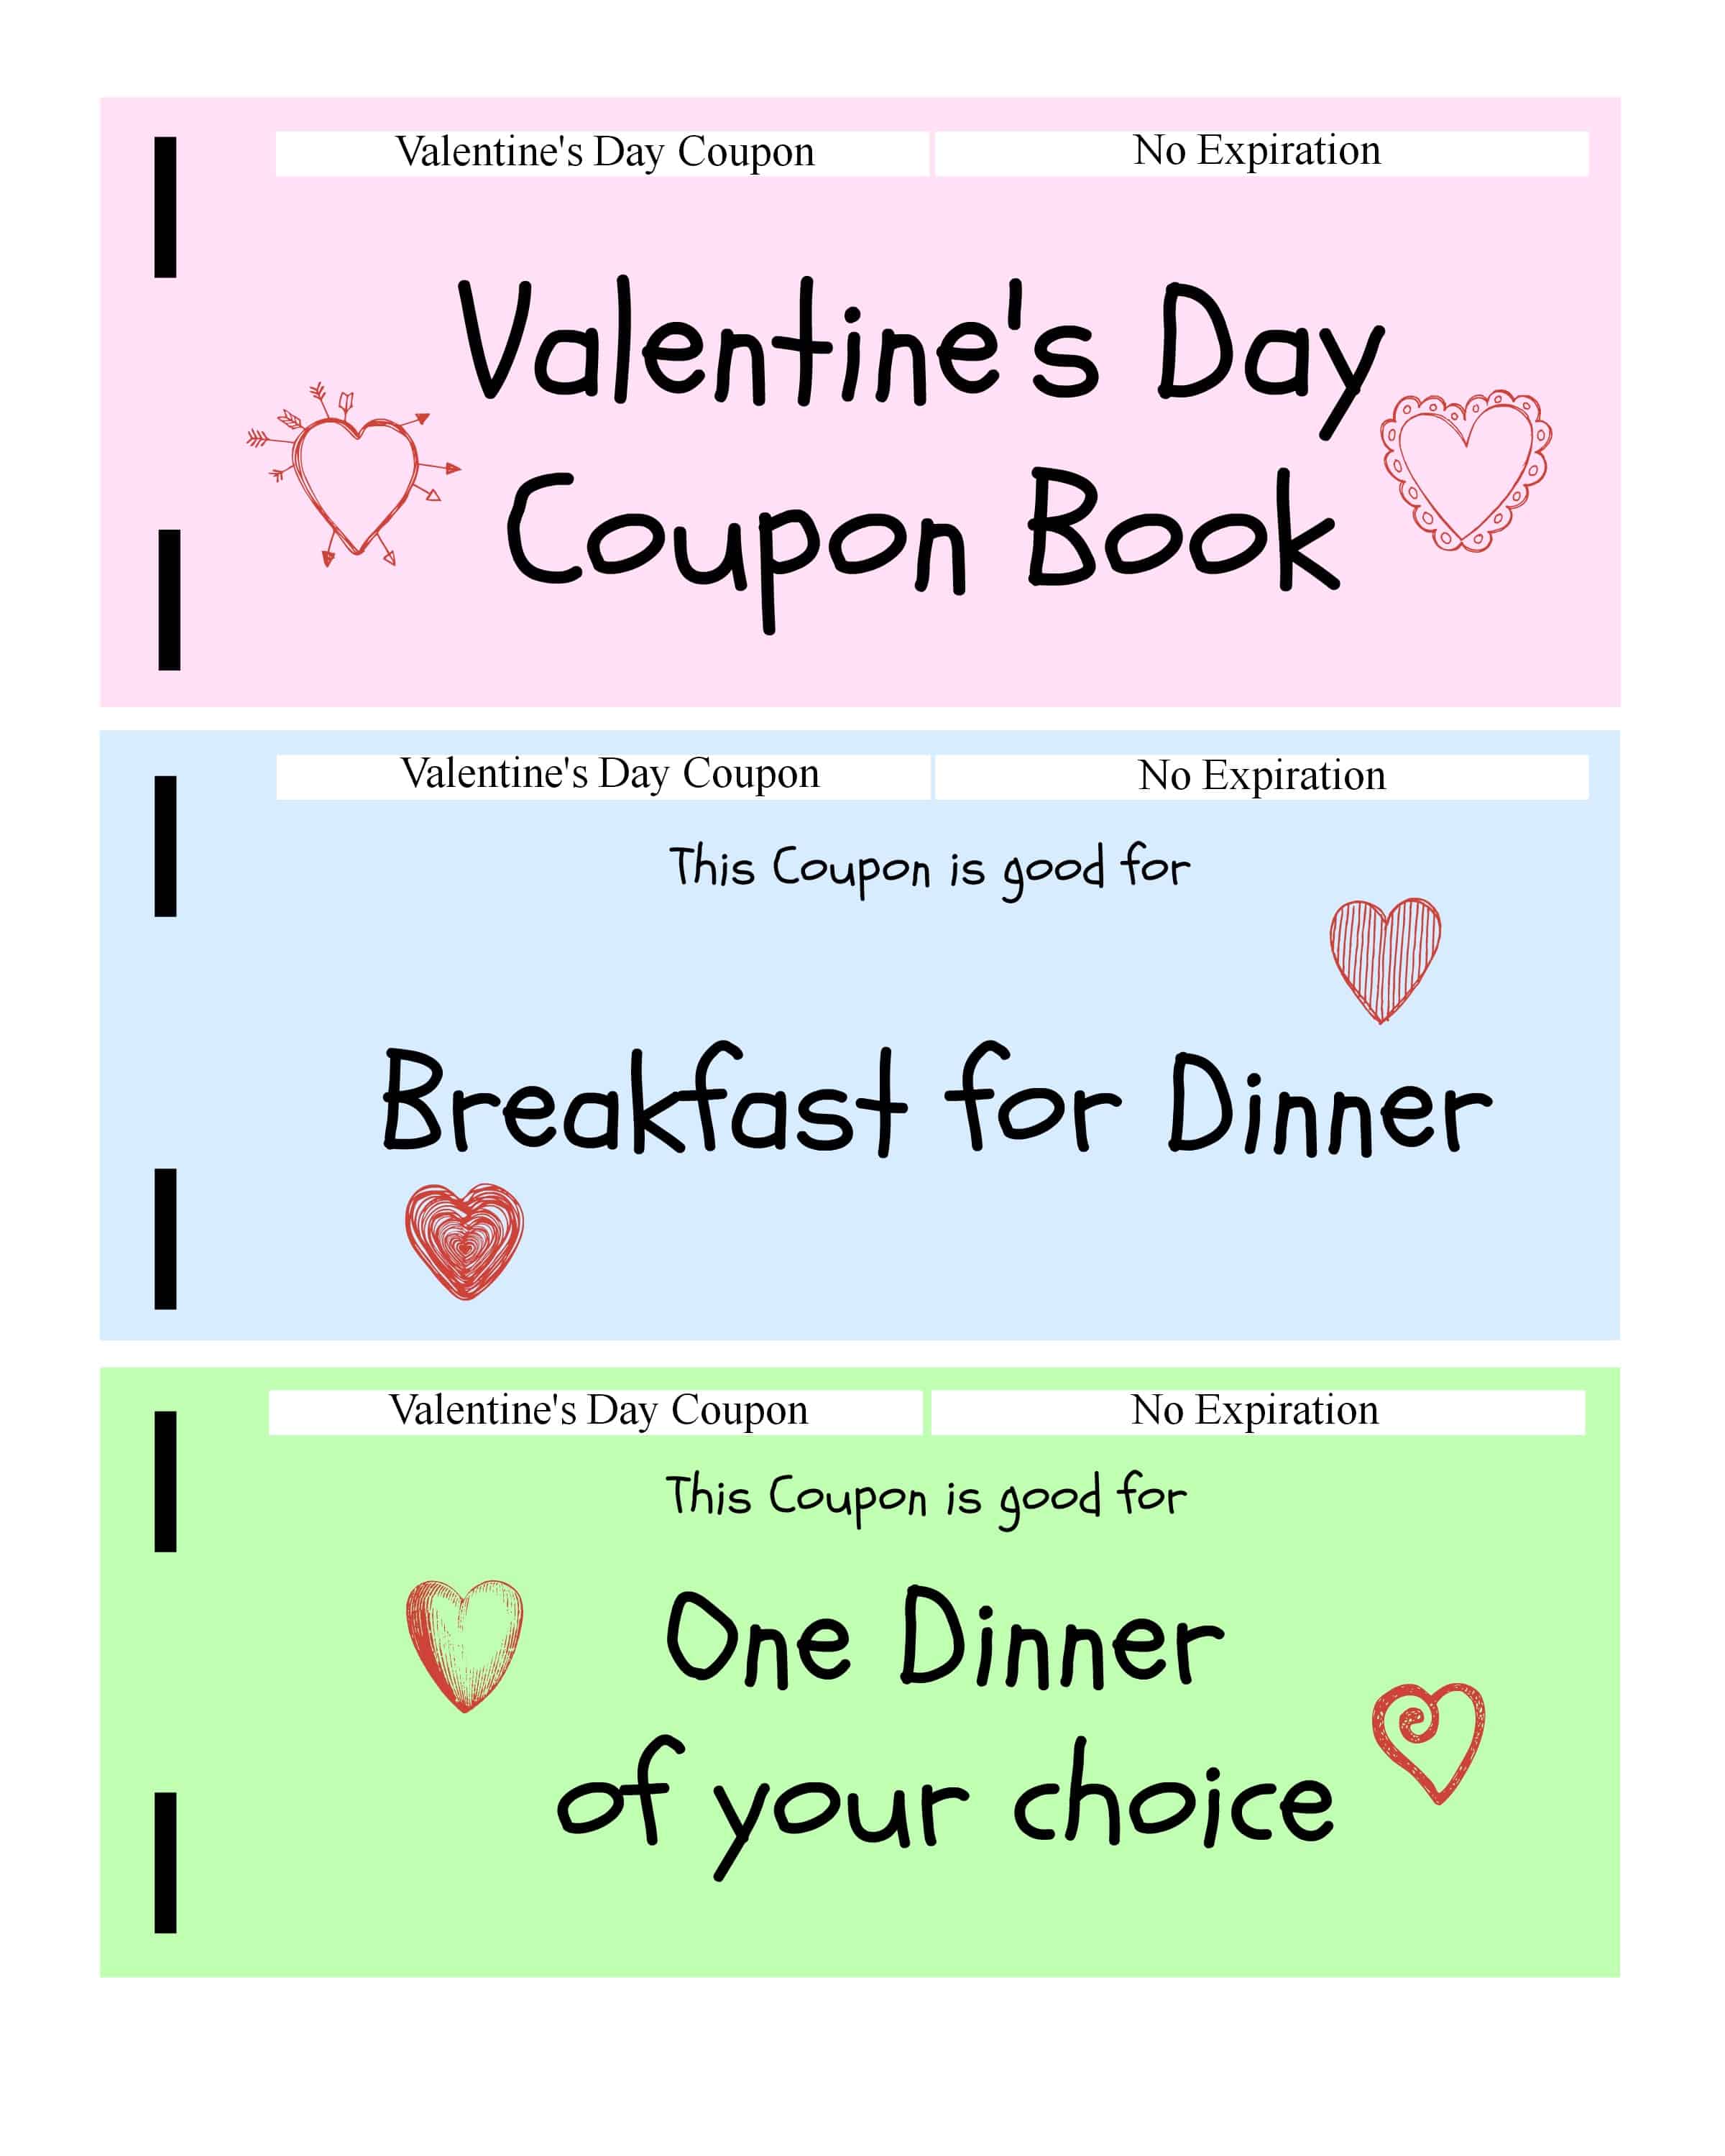 Valentine's Day Coupon Book Printable